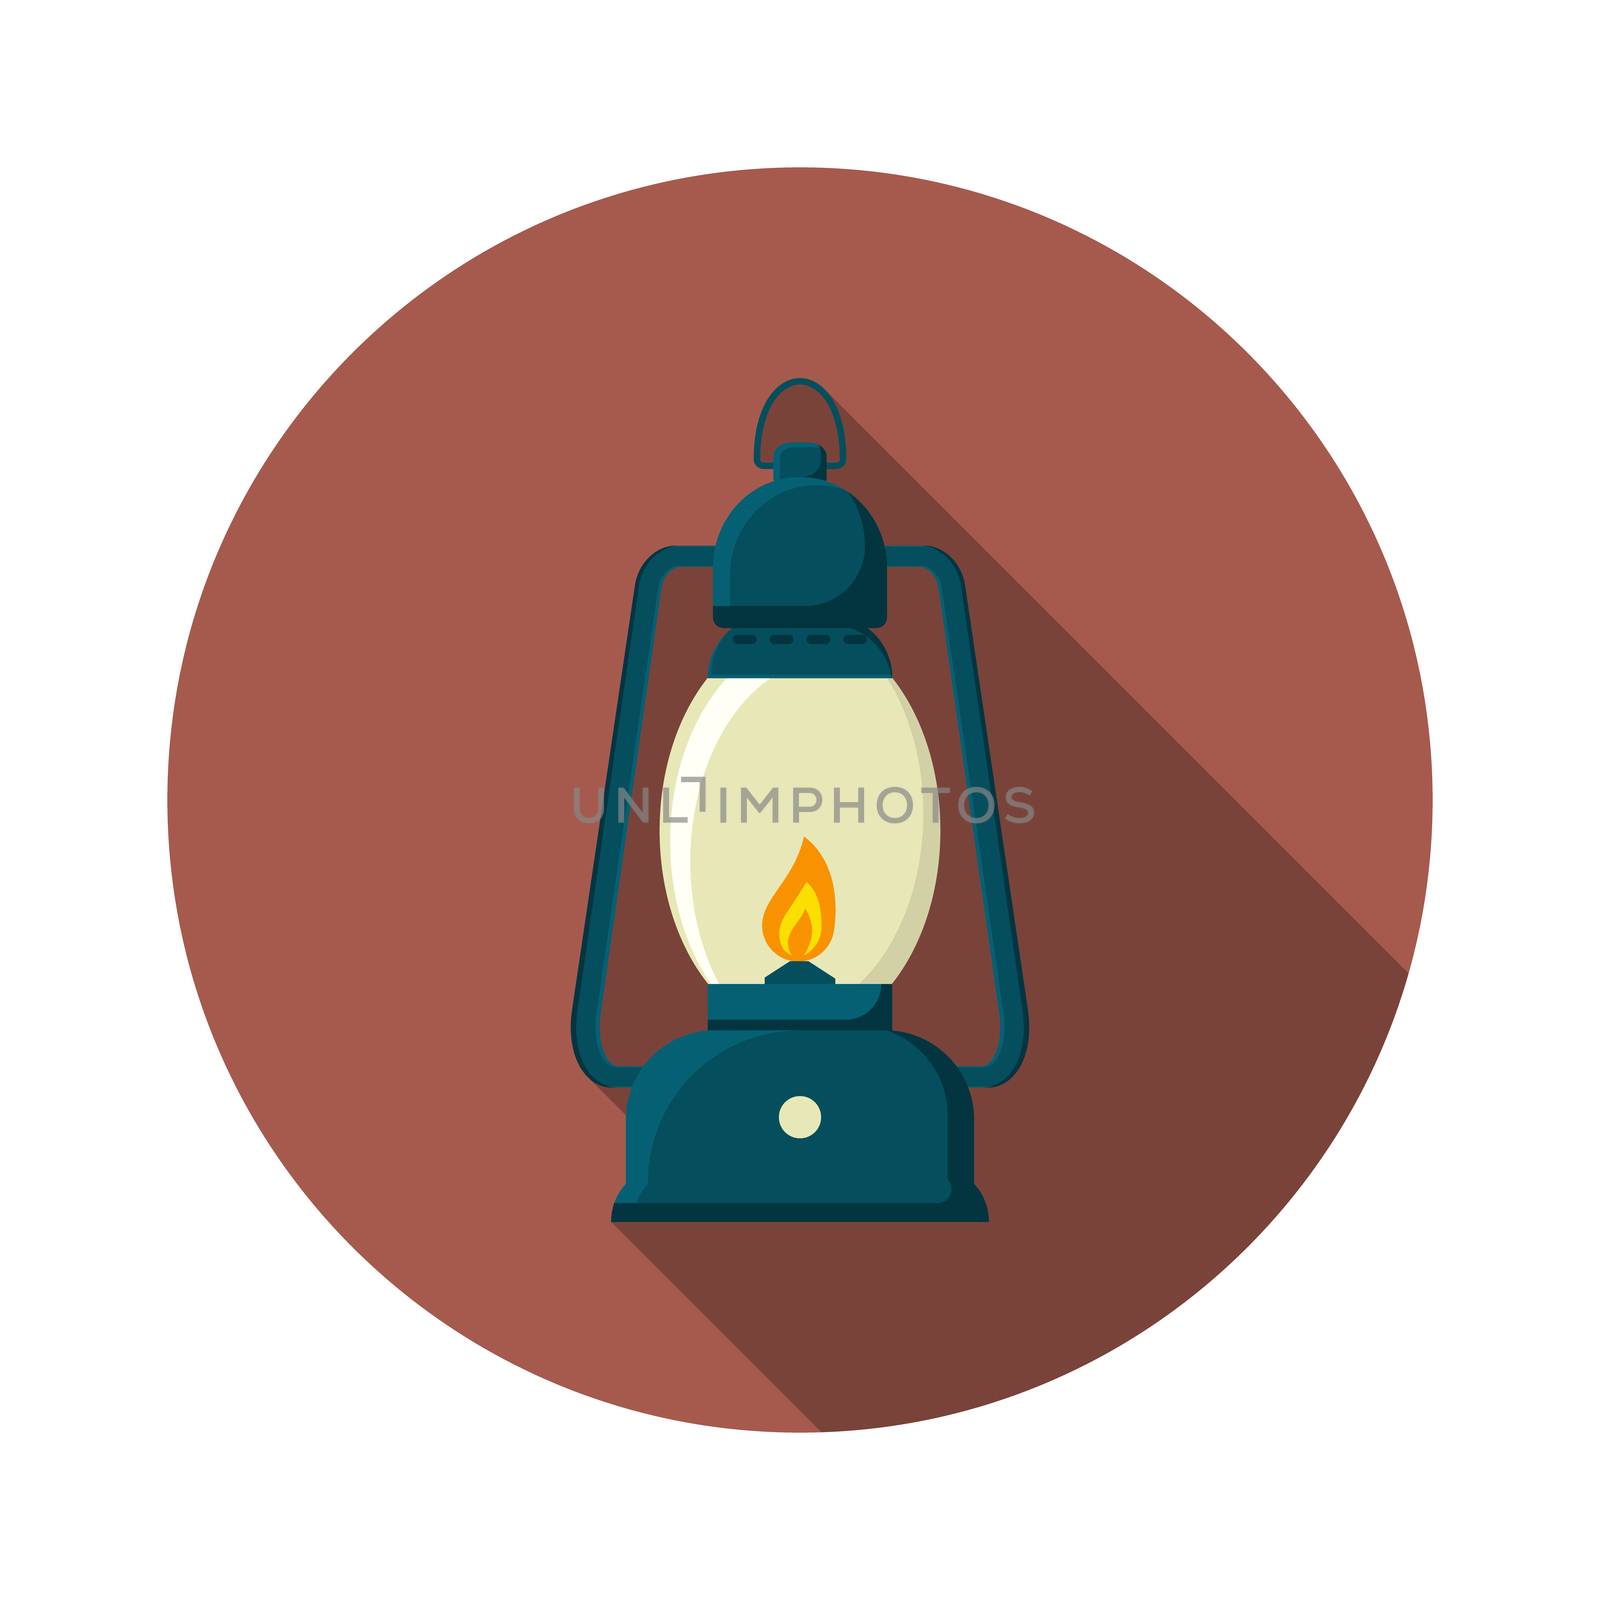 Flat design modern vector illustration of lantern icon, camping and hiking equipment with long shadow by Lemon_workshop